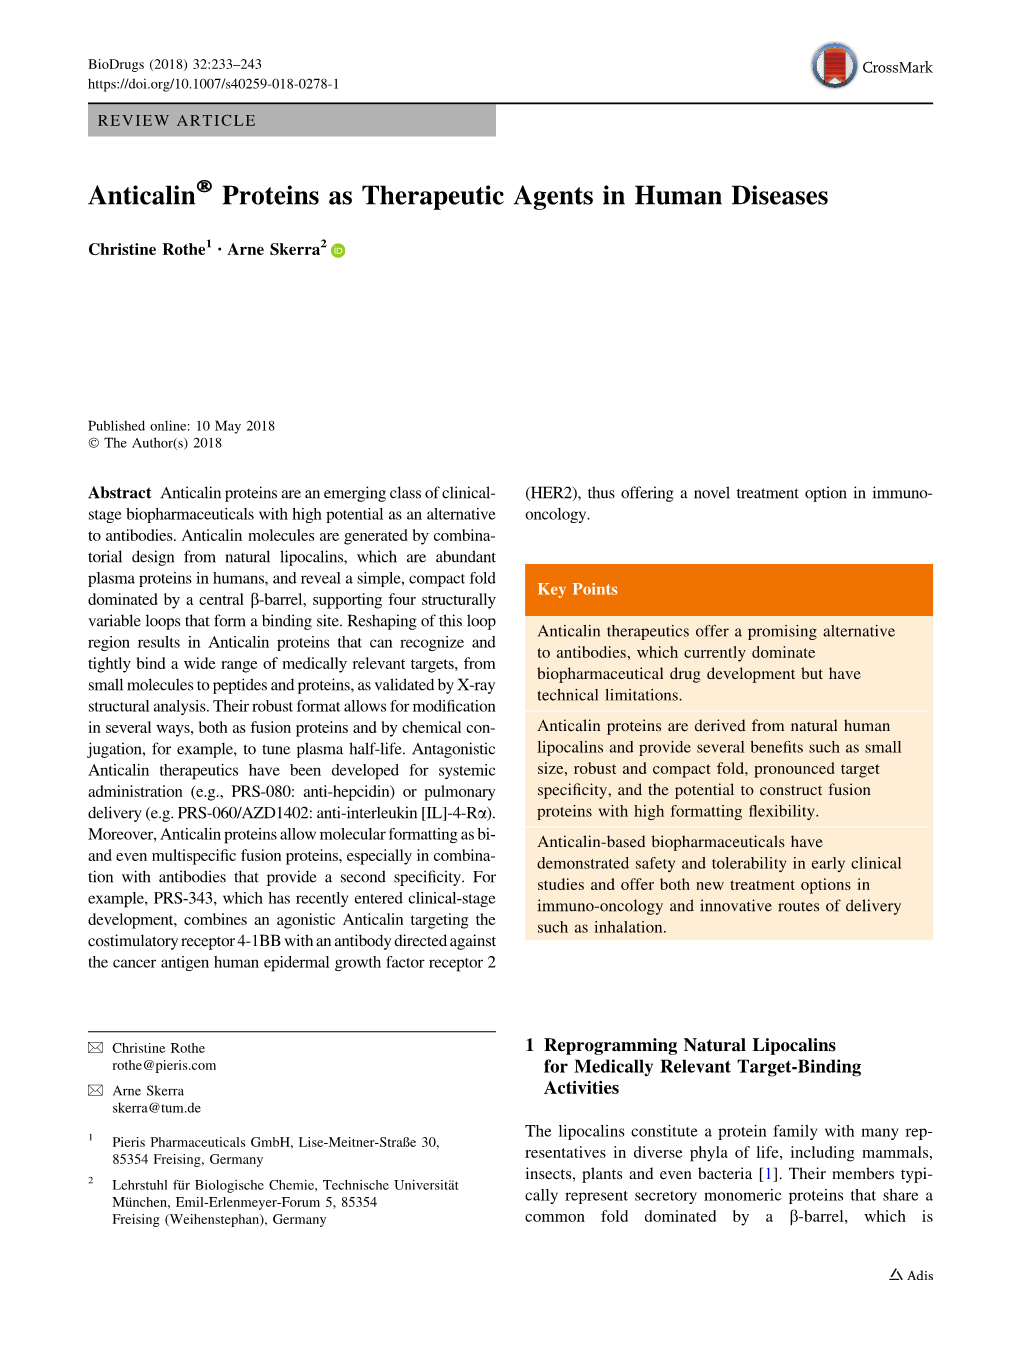 Anticalin® Proteins As Therapeutic Agents in Human Diseases